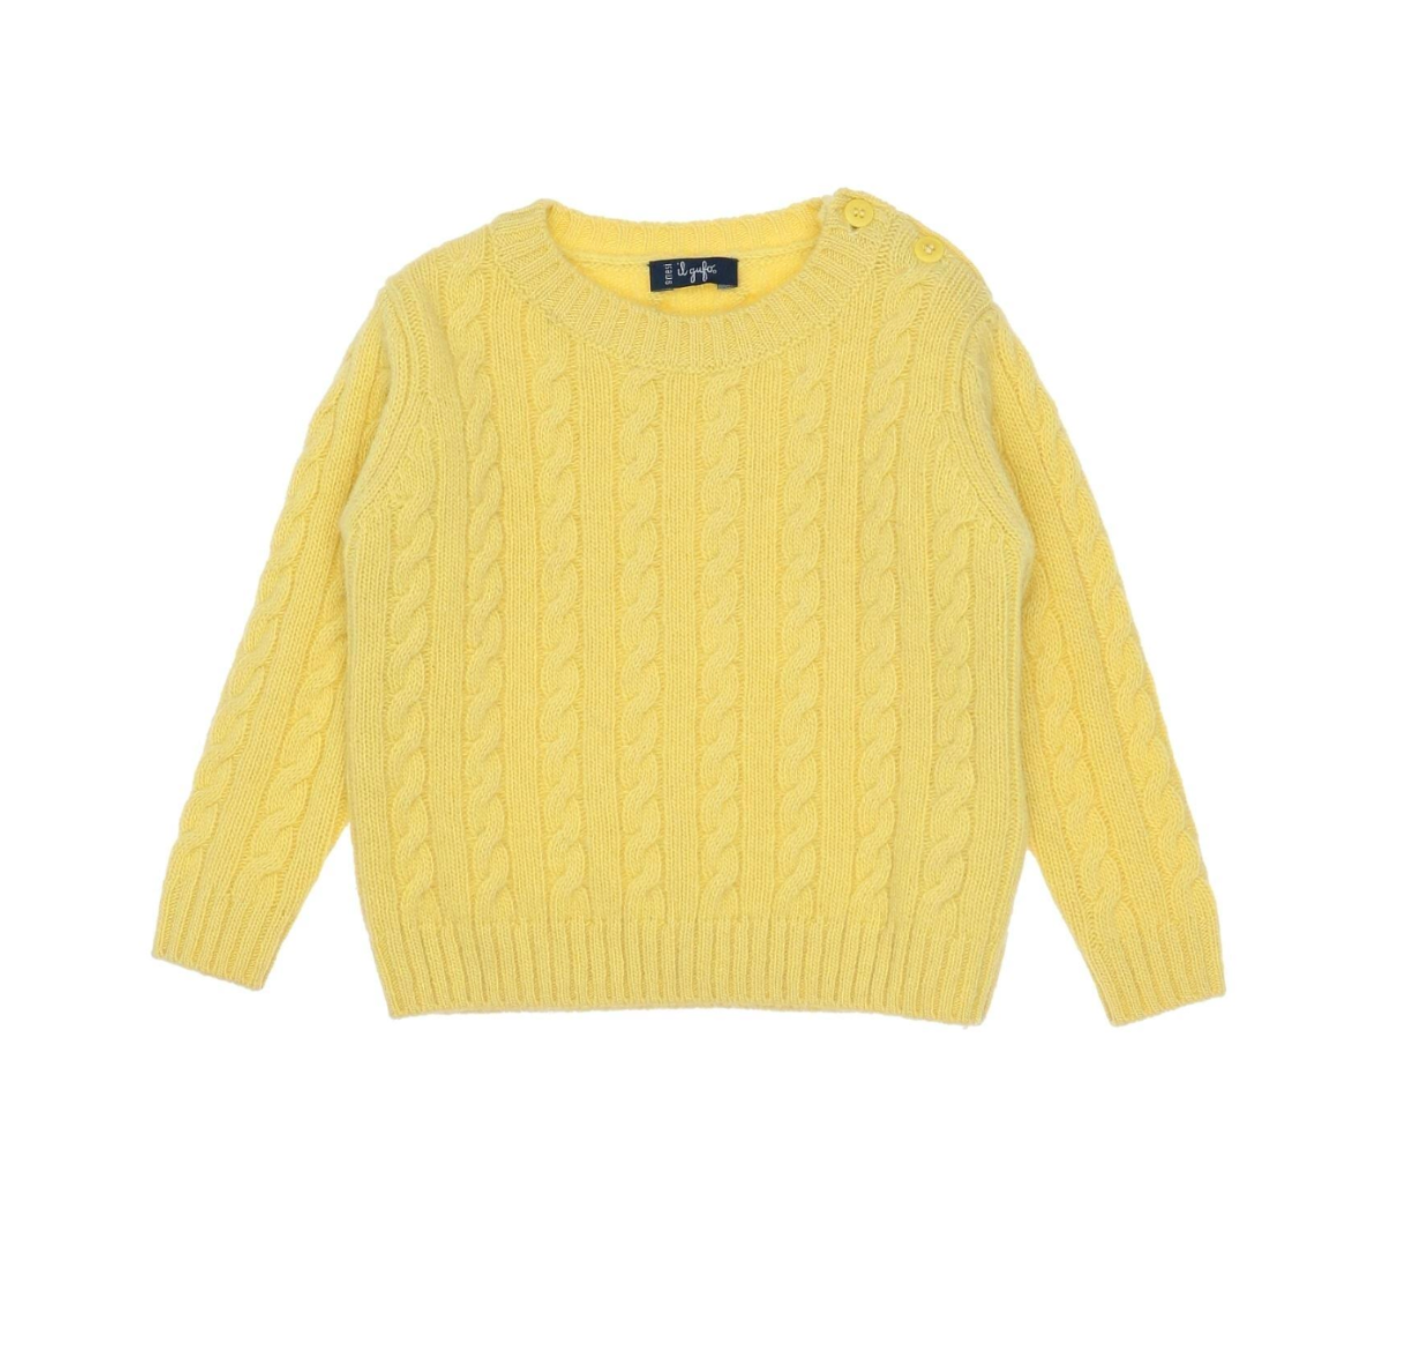 IL GUFO - Cable knit sweater in yellow wool - 9 months